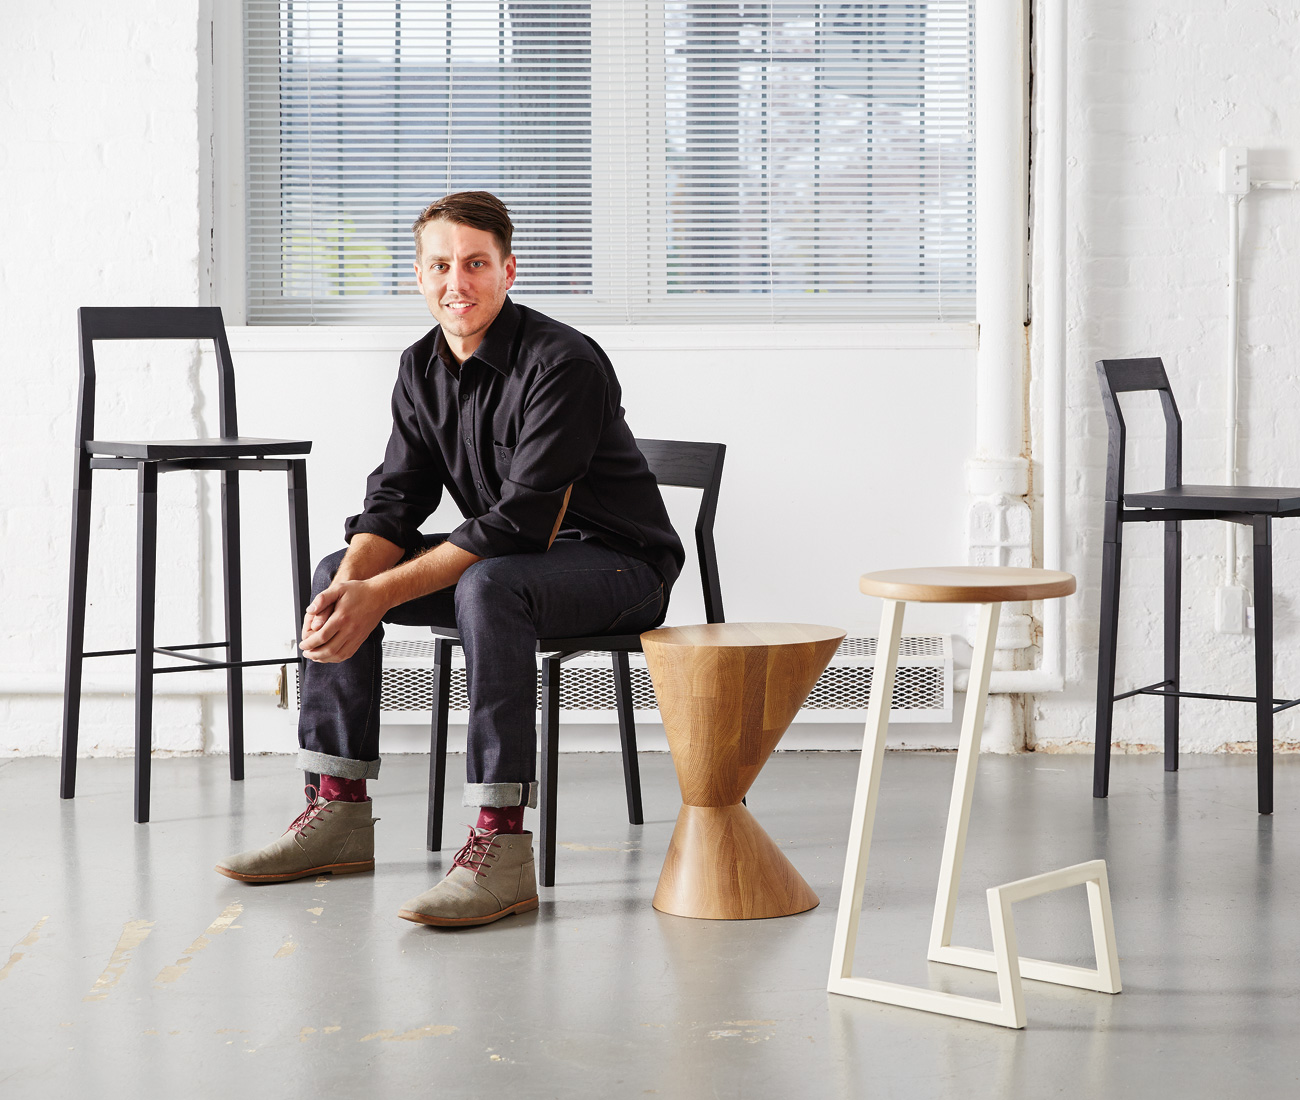 From left to right: Parkdale counter stool, Parkdale dining chair, Old Town stool off axis, Corktown bar stool, Parkdale bar stool. All available at Klaus (300 King St E).